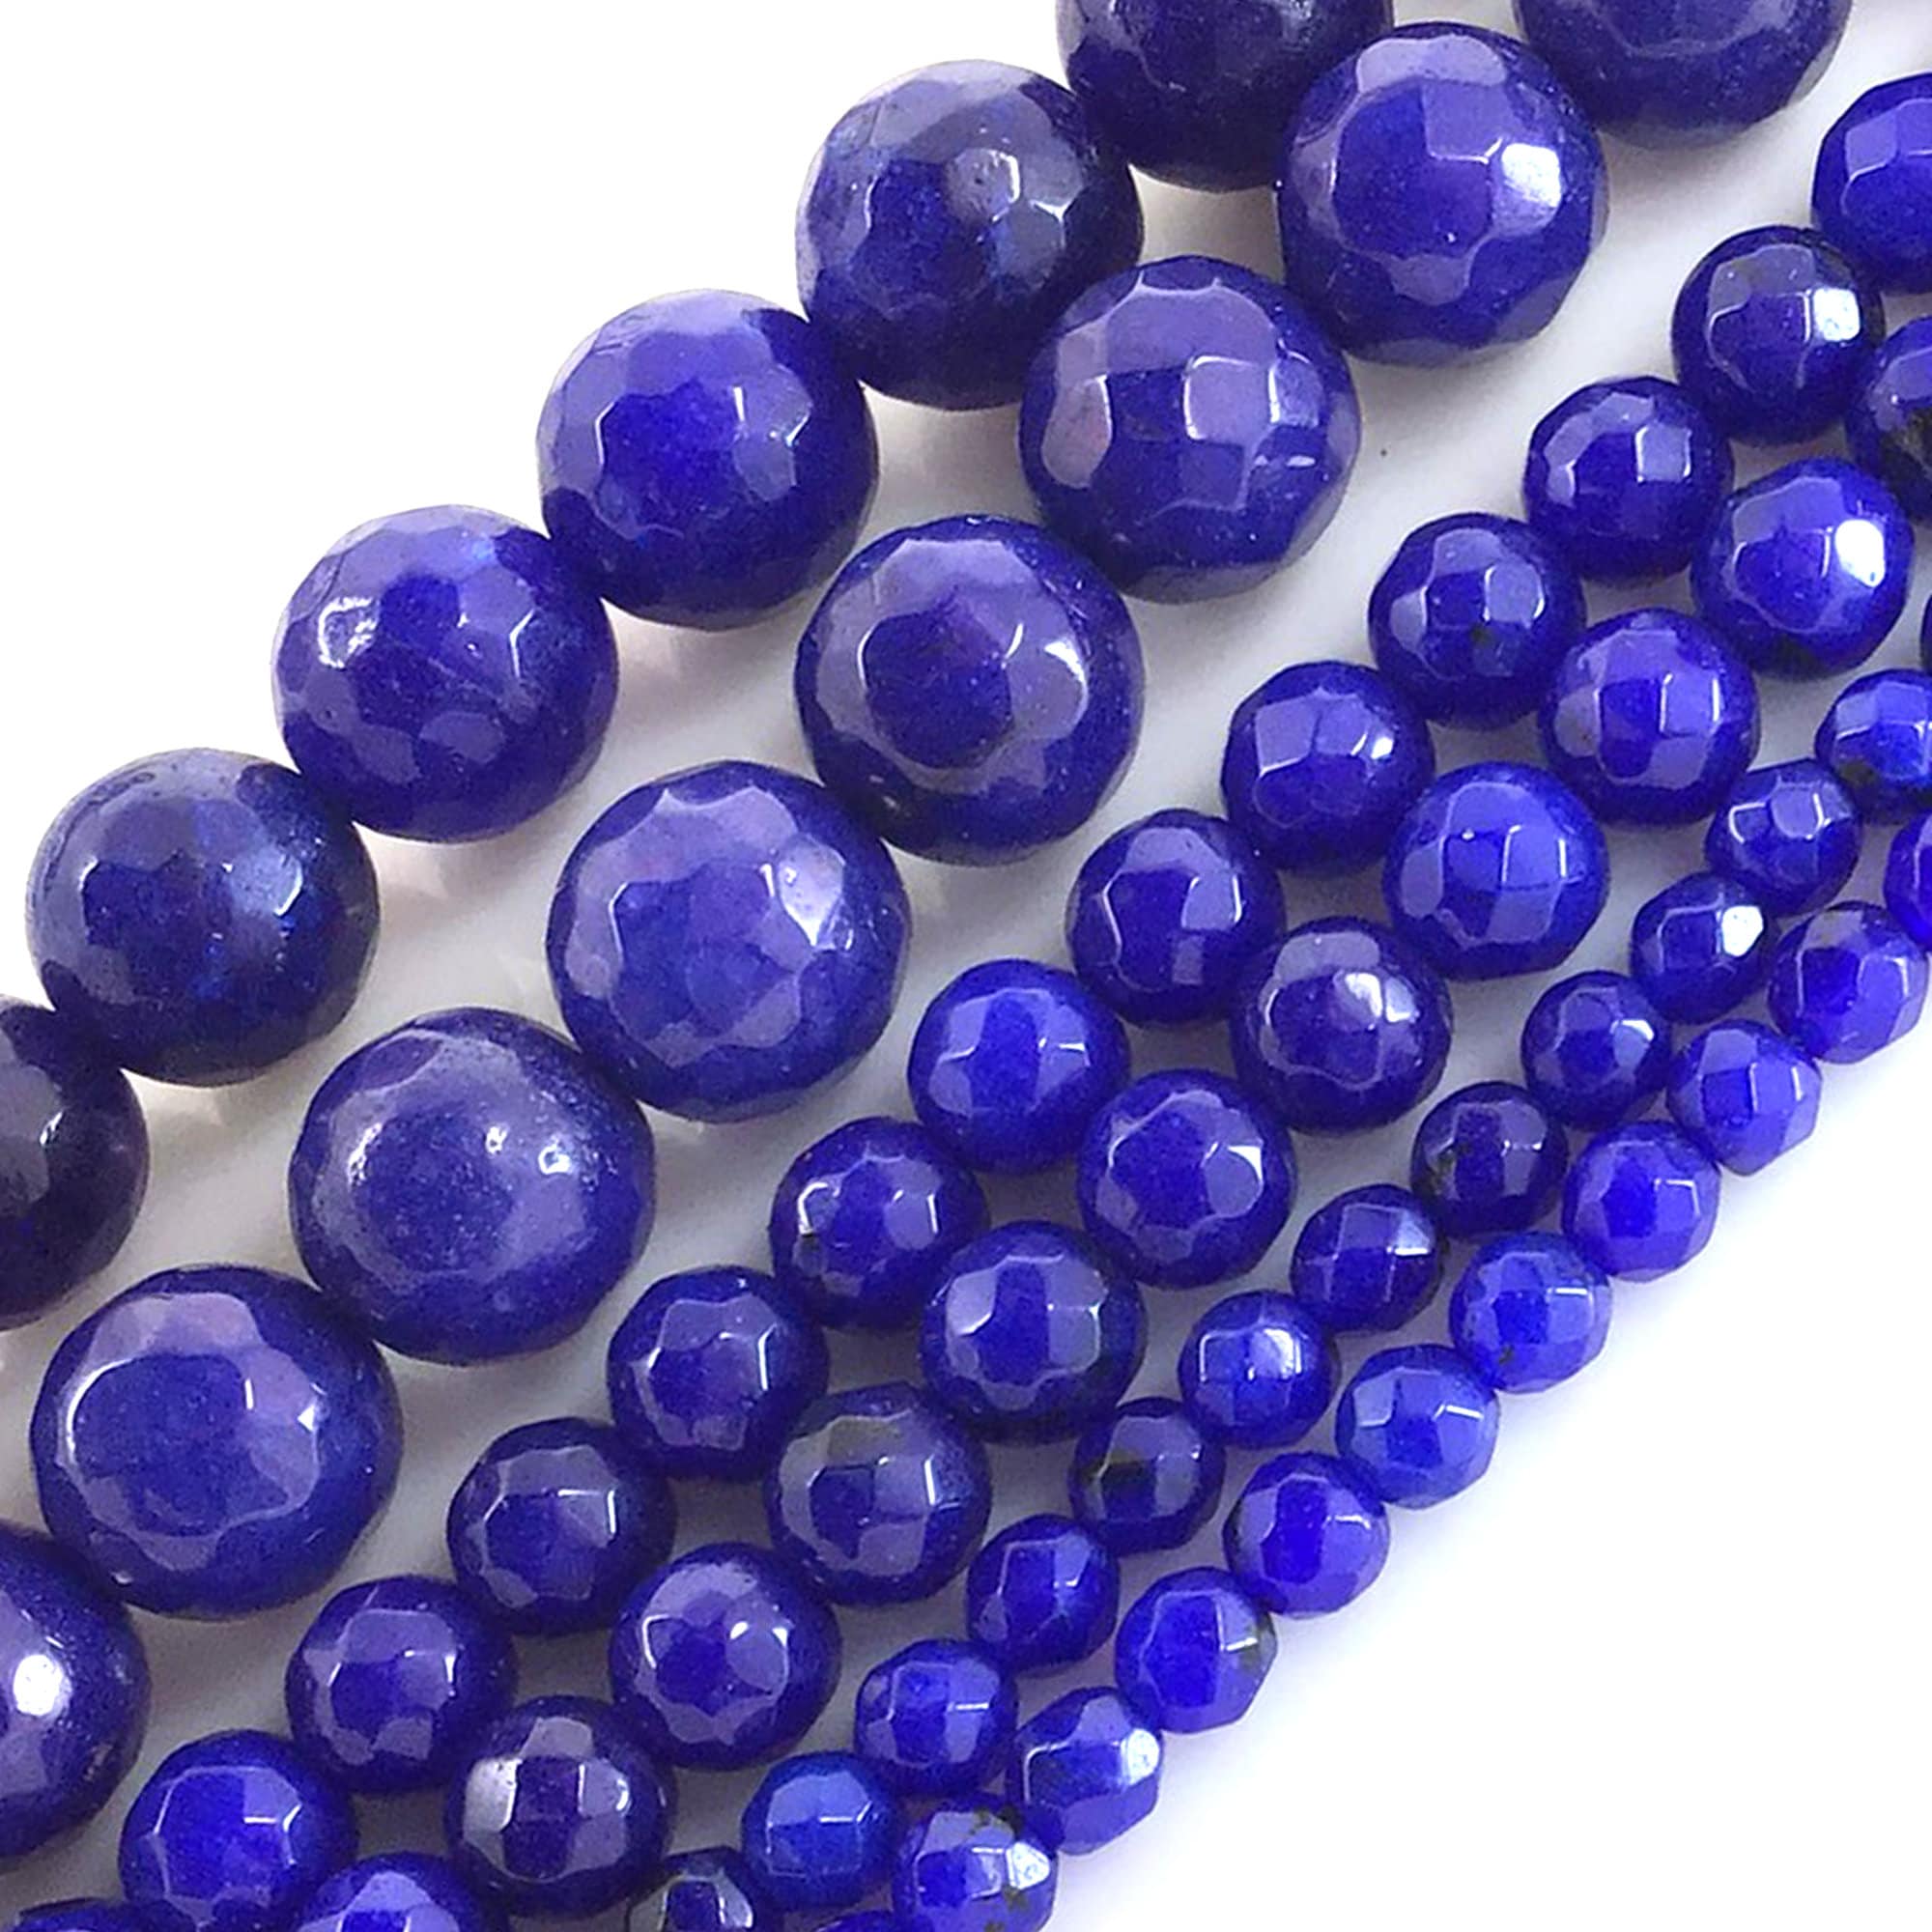 Sapphire Blue Jade Faceted Round Loose Bead 15 inch | Etsy